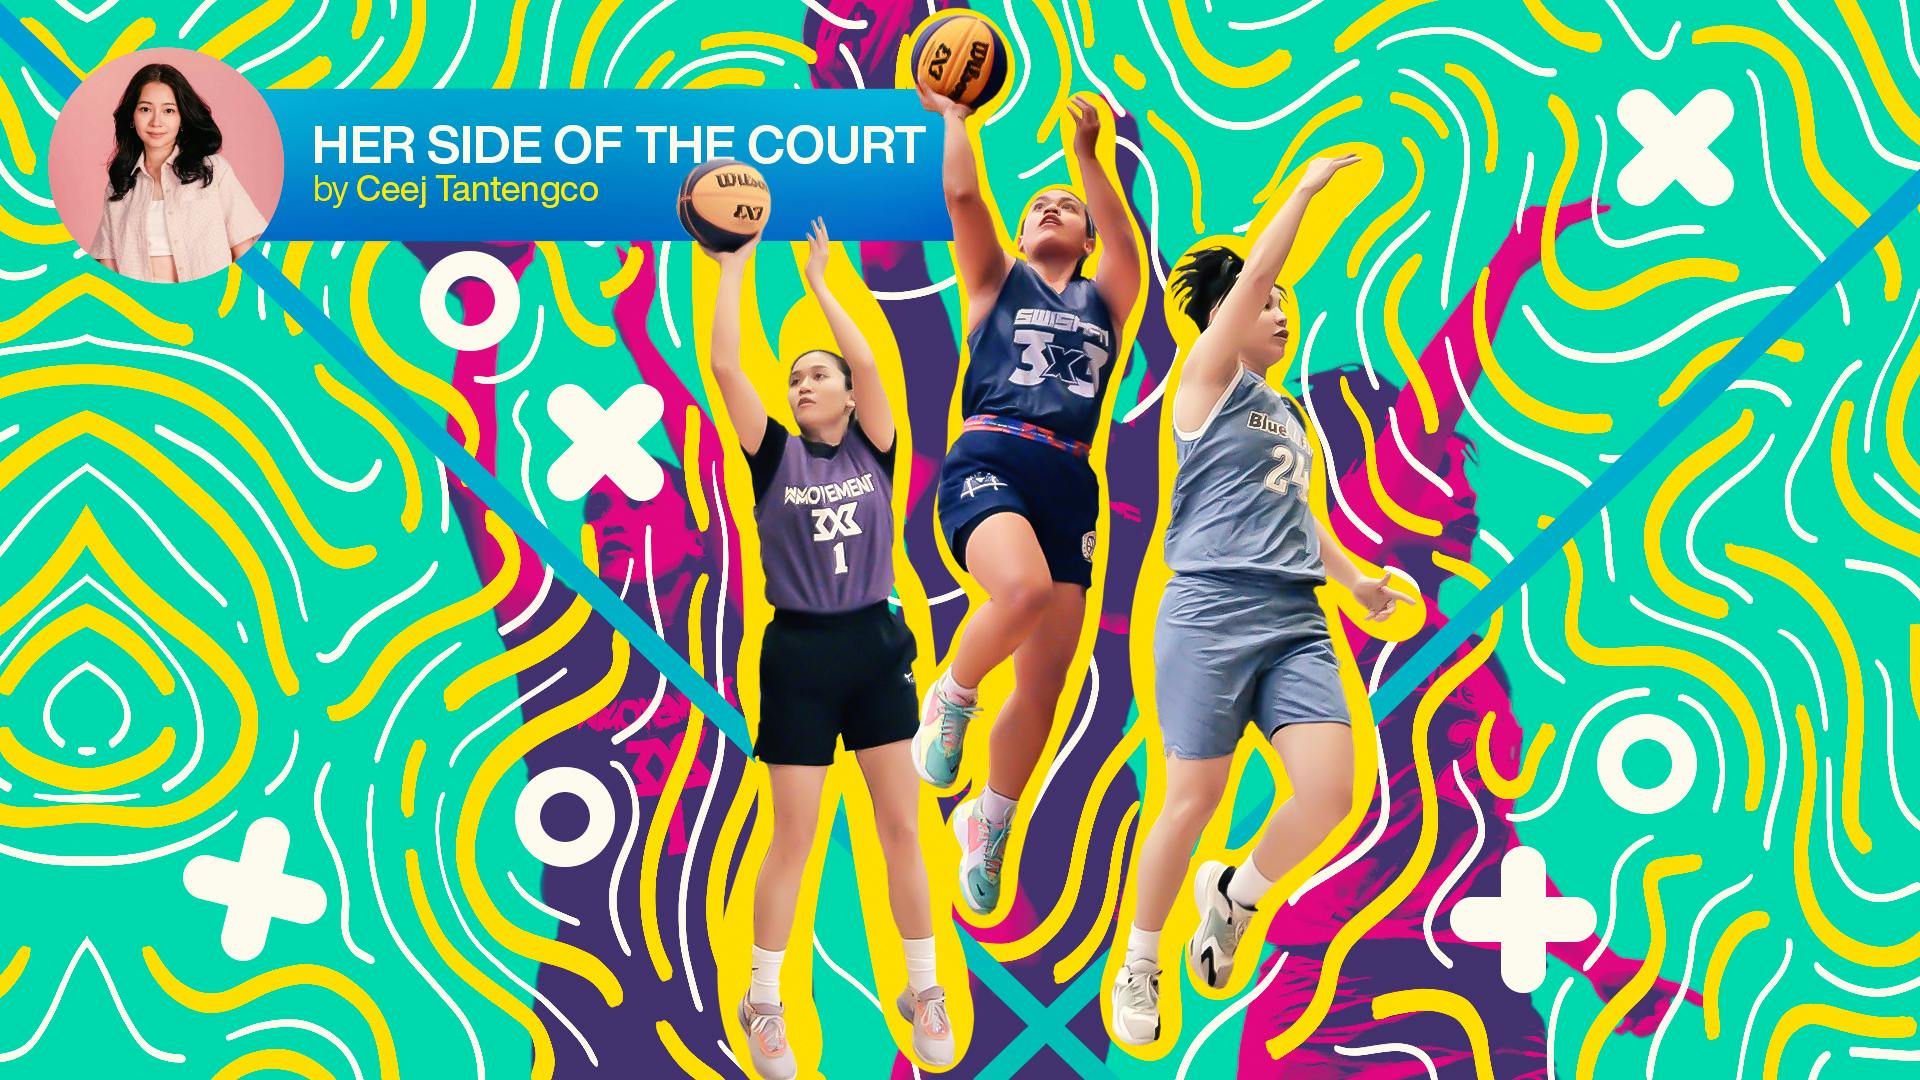 HER SIDE OF THE COURT | For women, by women: Athletes join forces to create WMovement’s 3x3 tournaments